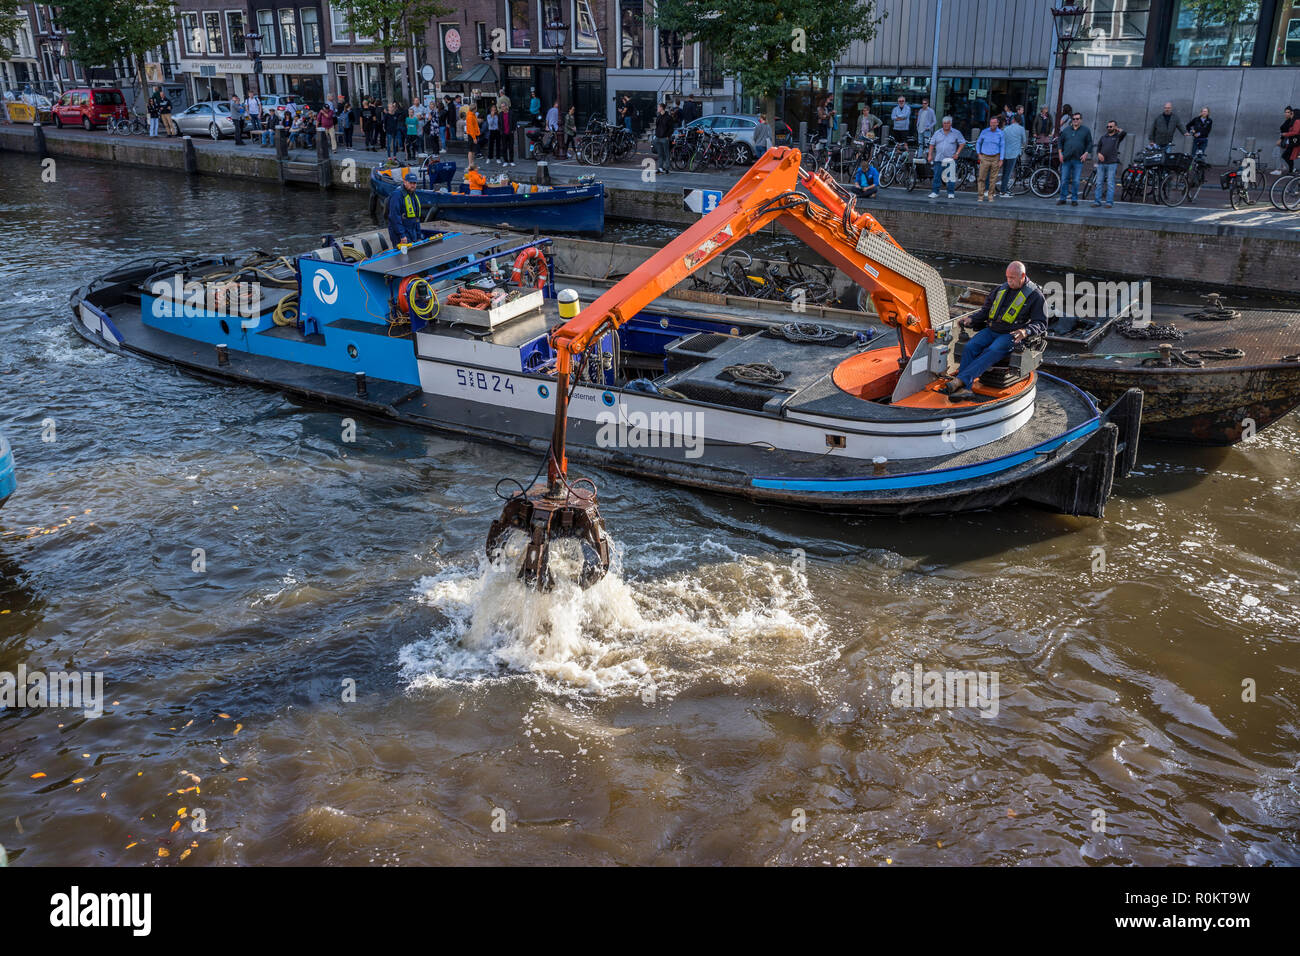 Amsterdam, dredging dumped bikes from the canals Stock Photo